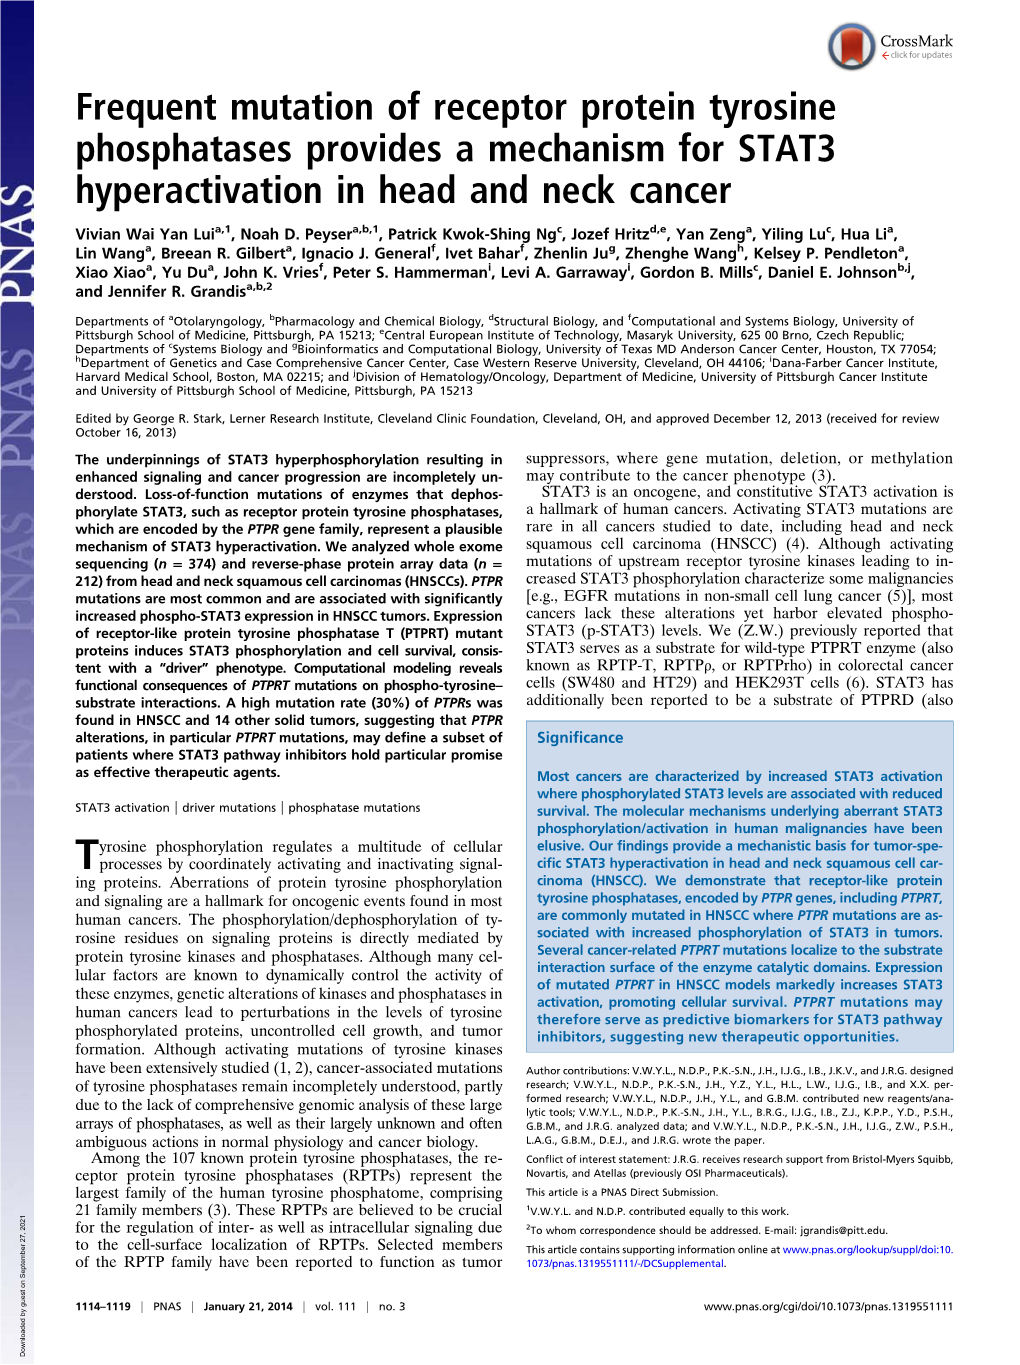 Frequent Mutation of Receptor Protein Tyrosine Phosphatases Provides a Mechanism for STAT3 Hyperactivation in Head and Neck Cancer